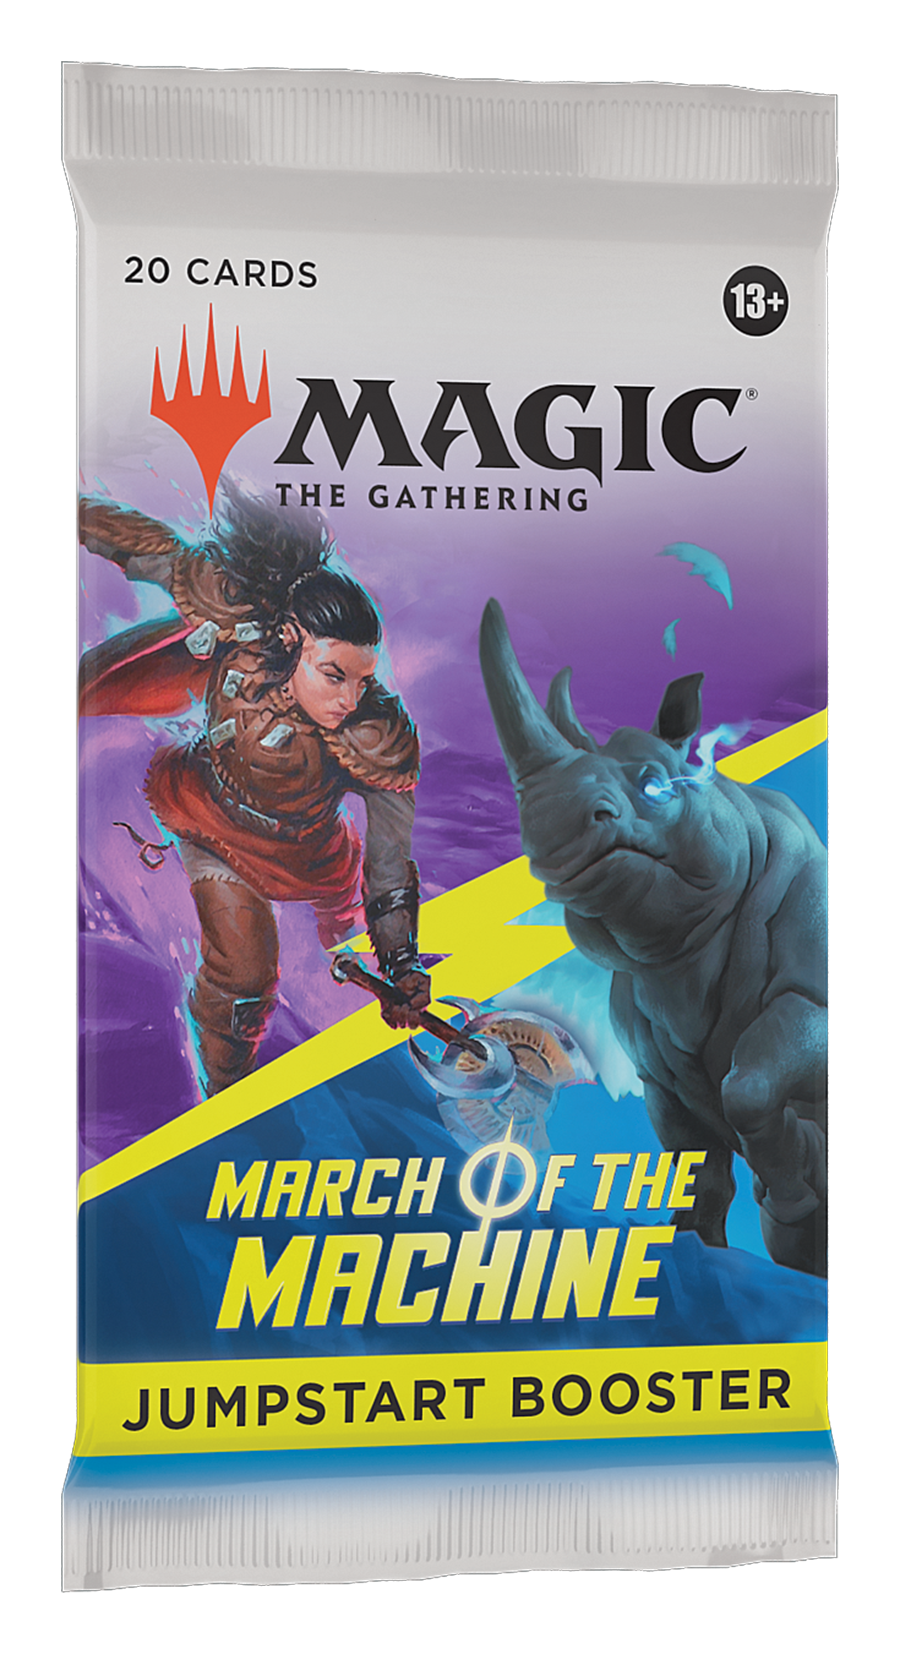 Magic: the Gathering - March of the Machine Jumpstart Booster Pack